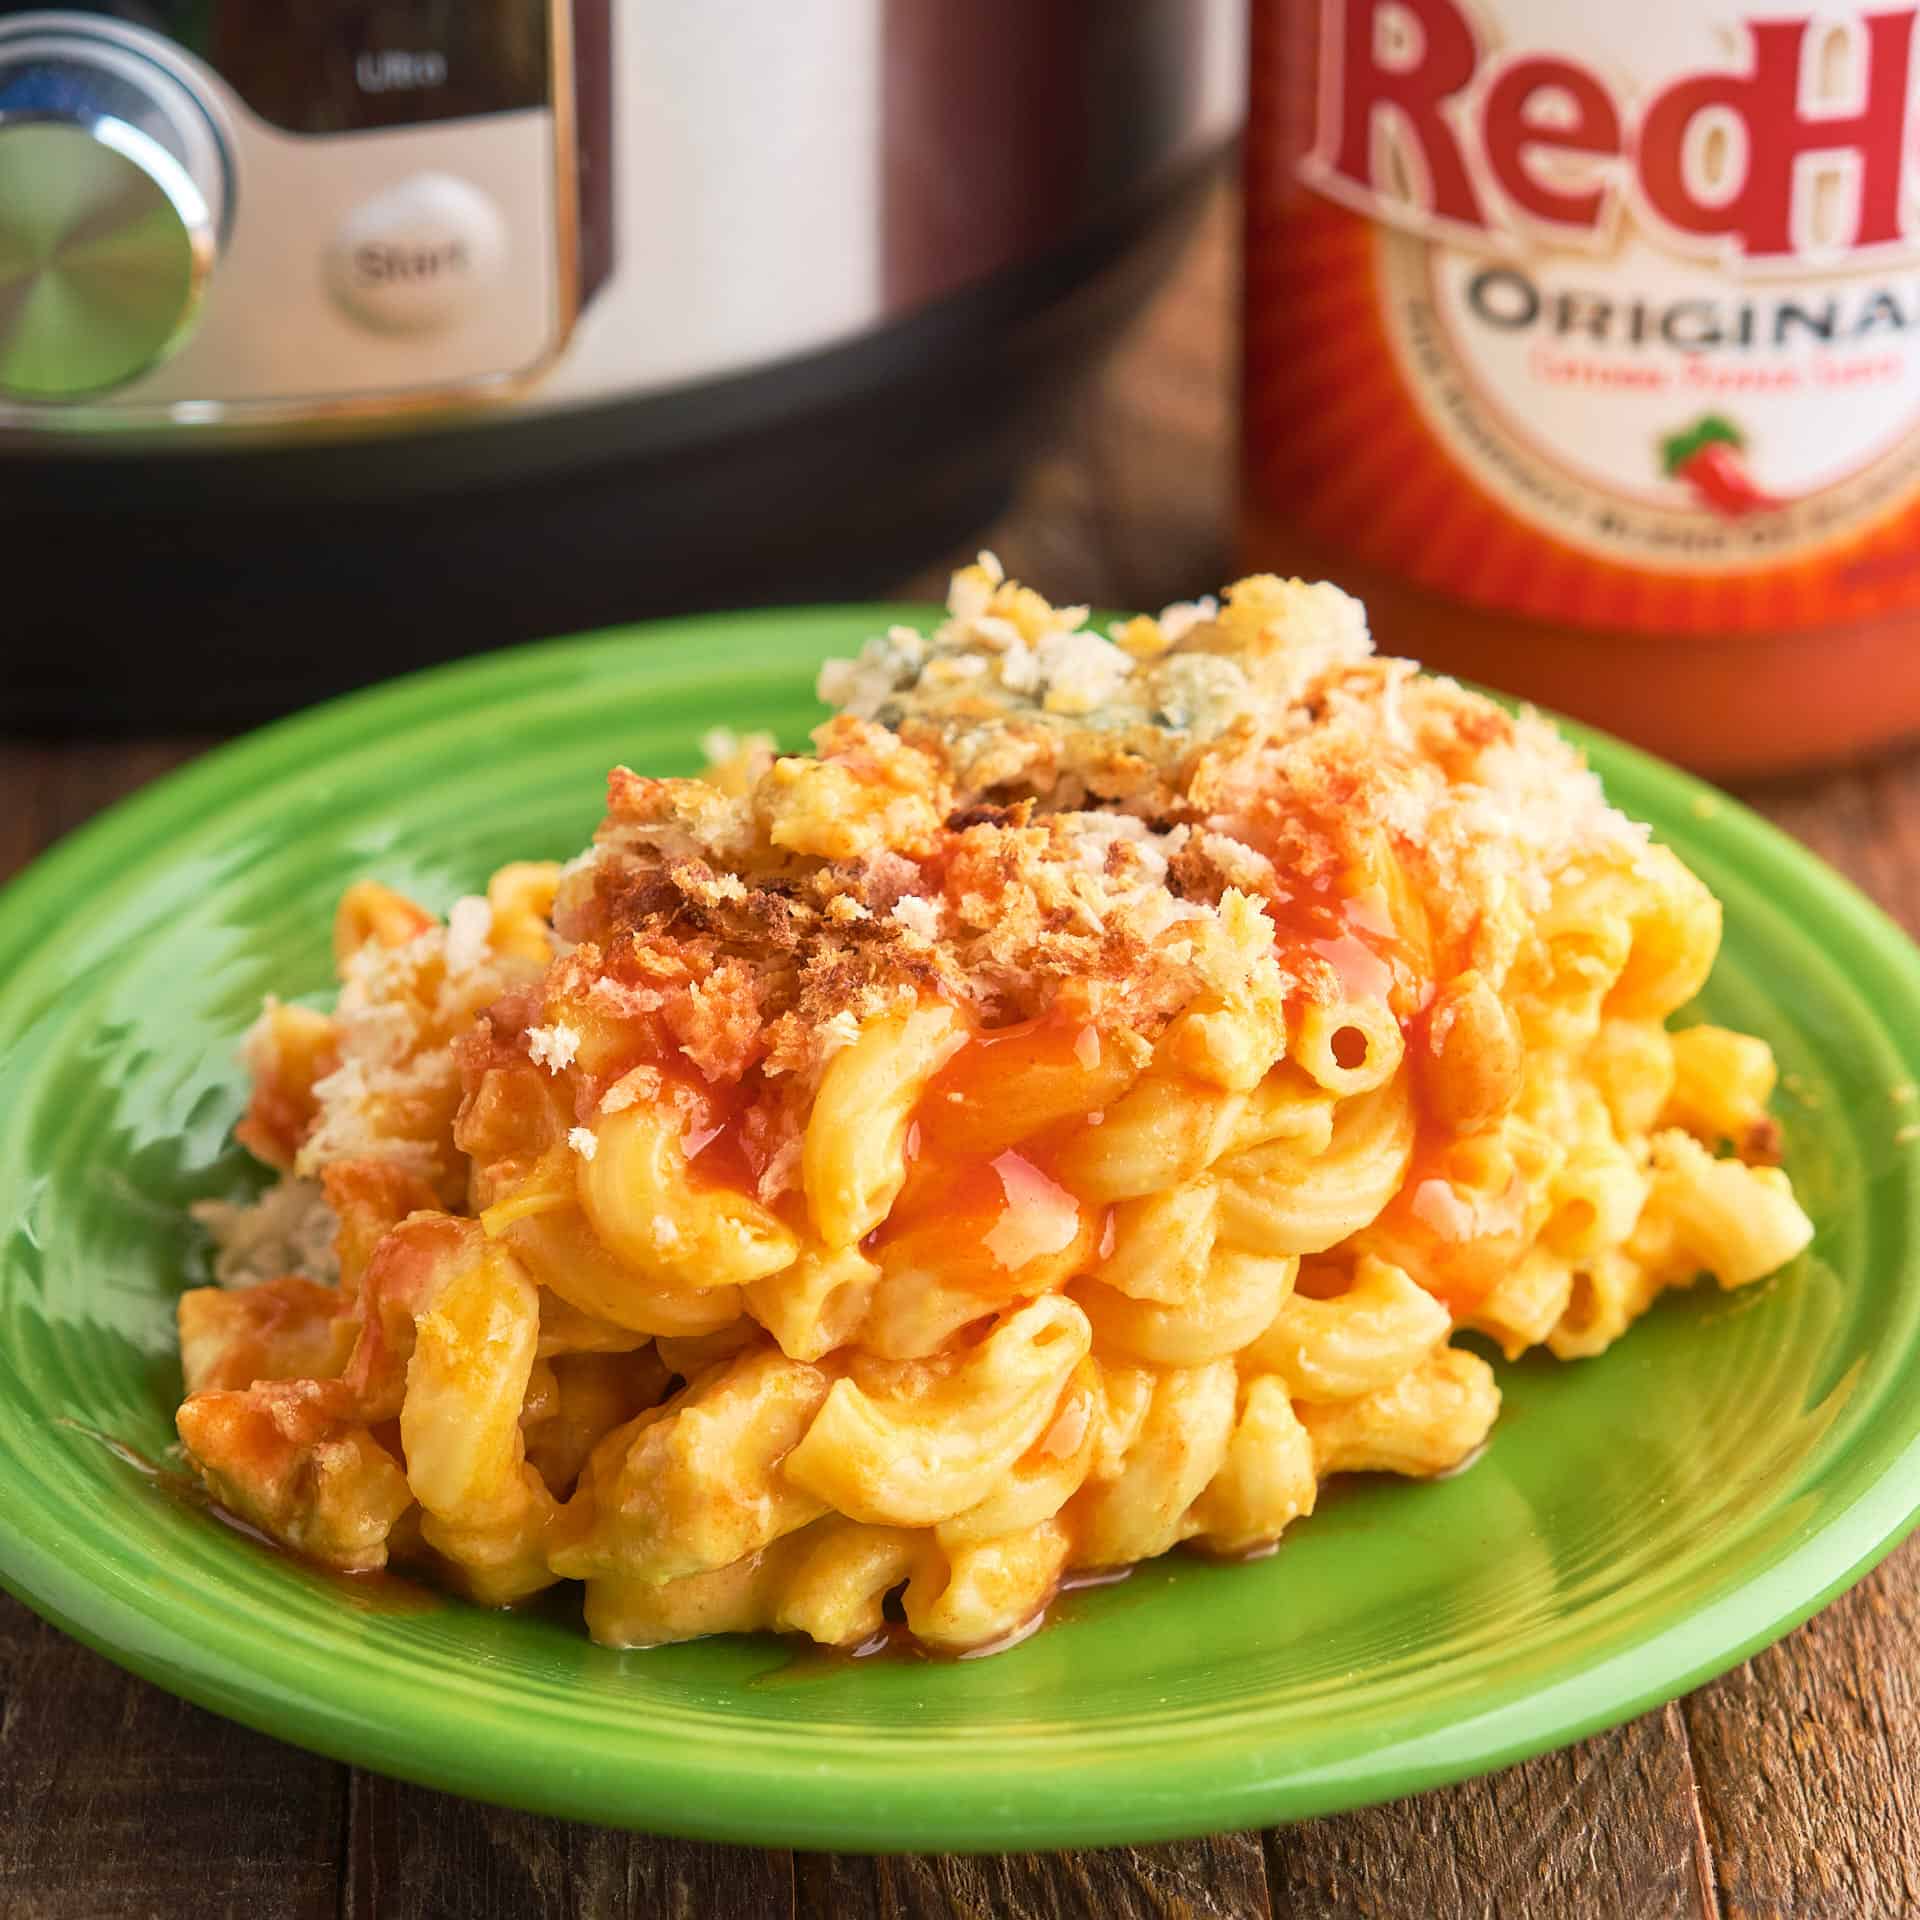 A plate of buffalo chicken mac and cheese in front of an Instant Pot and a bottle of Franks RedHot